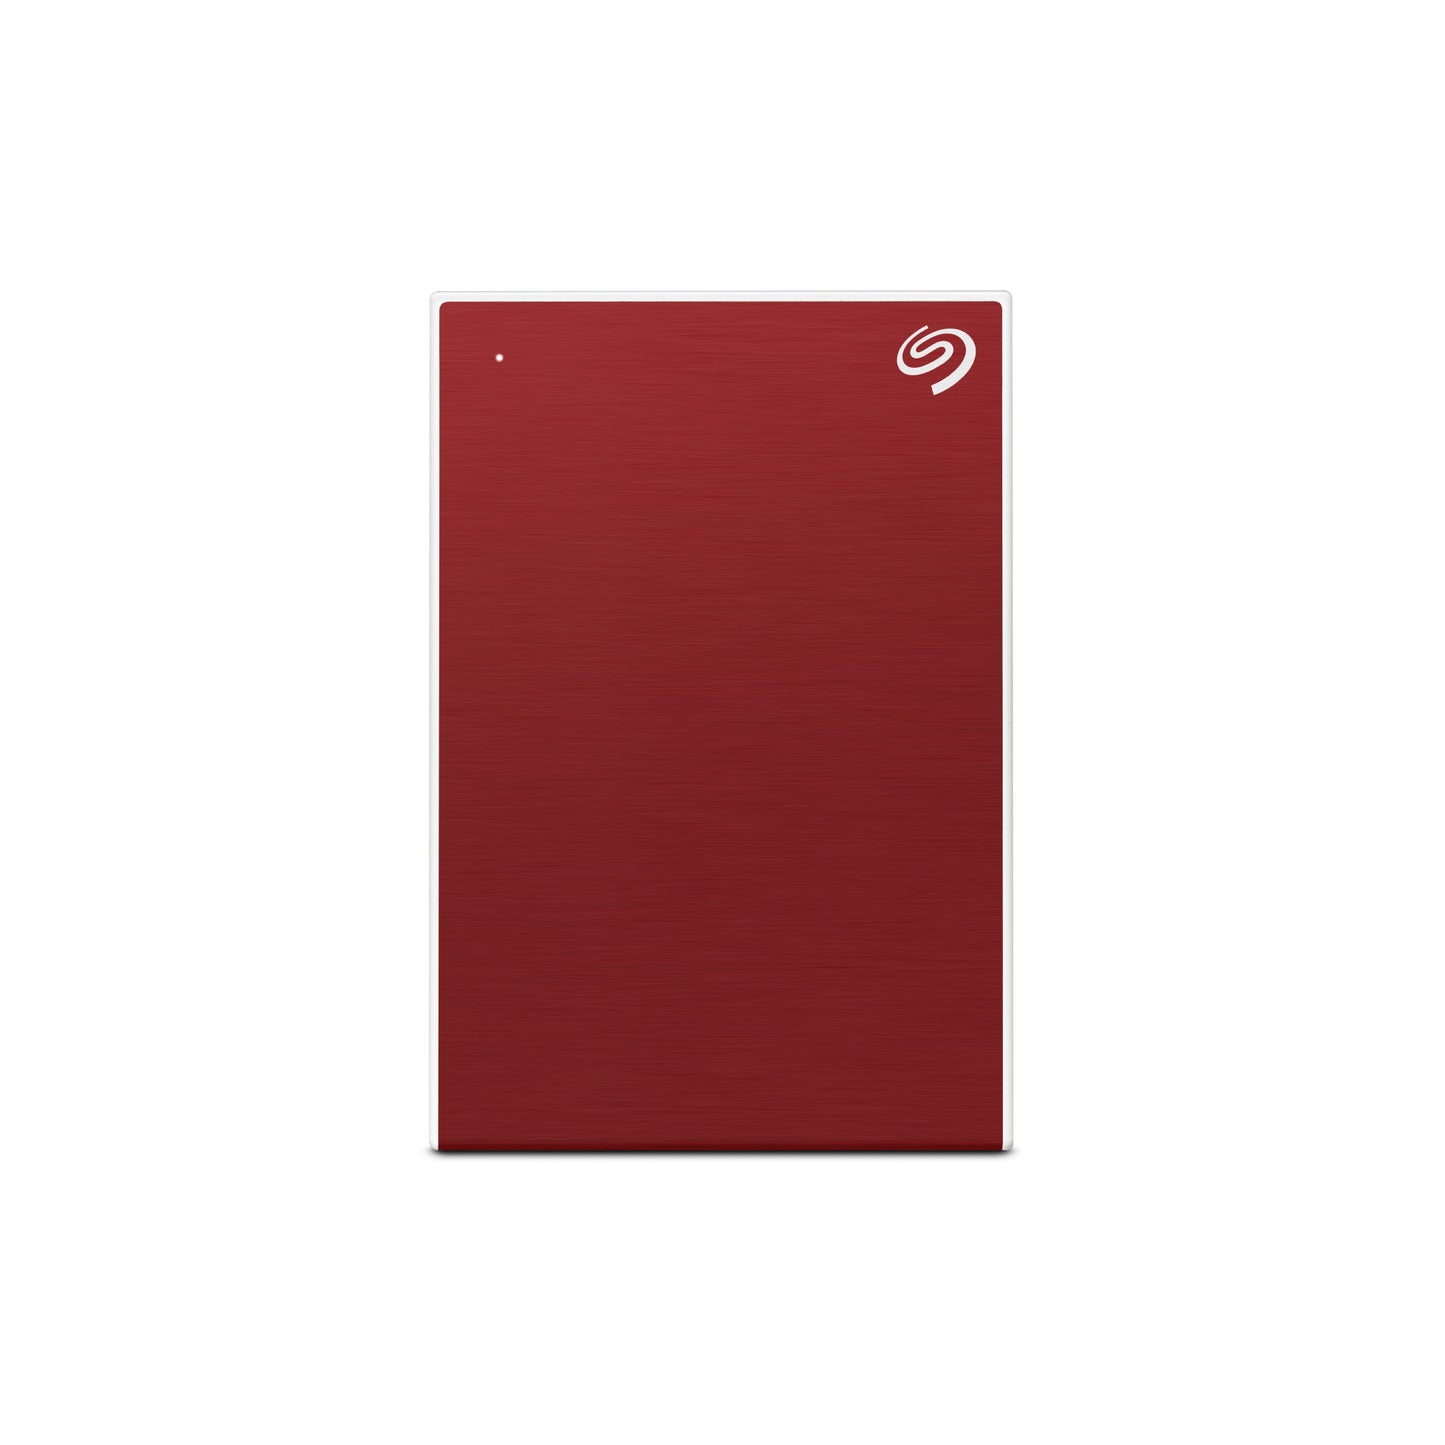 SEAGATE One Touch Slim USB 3.0 1TB - Red